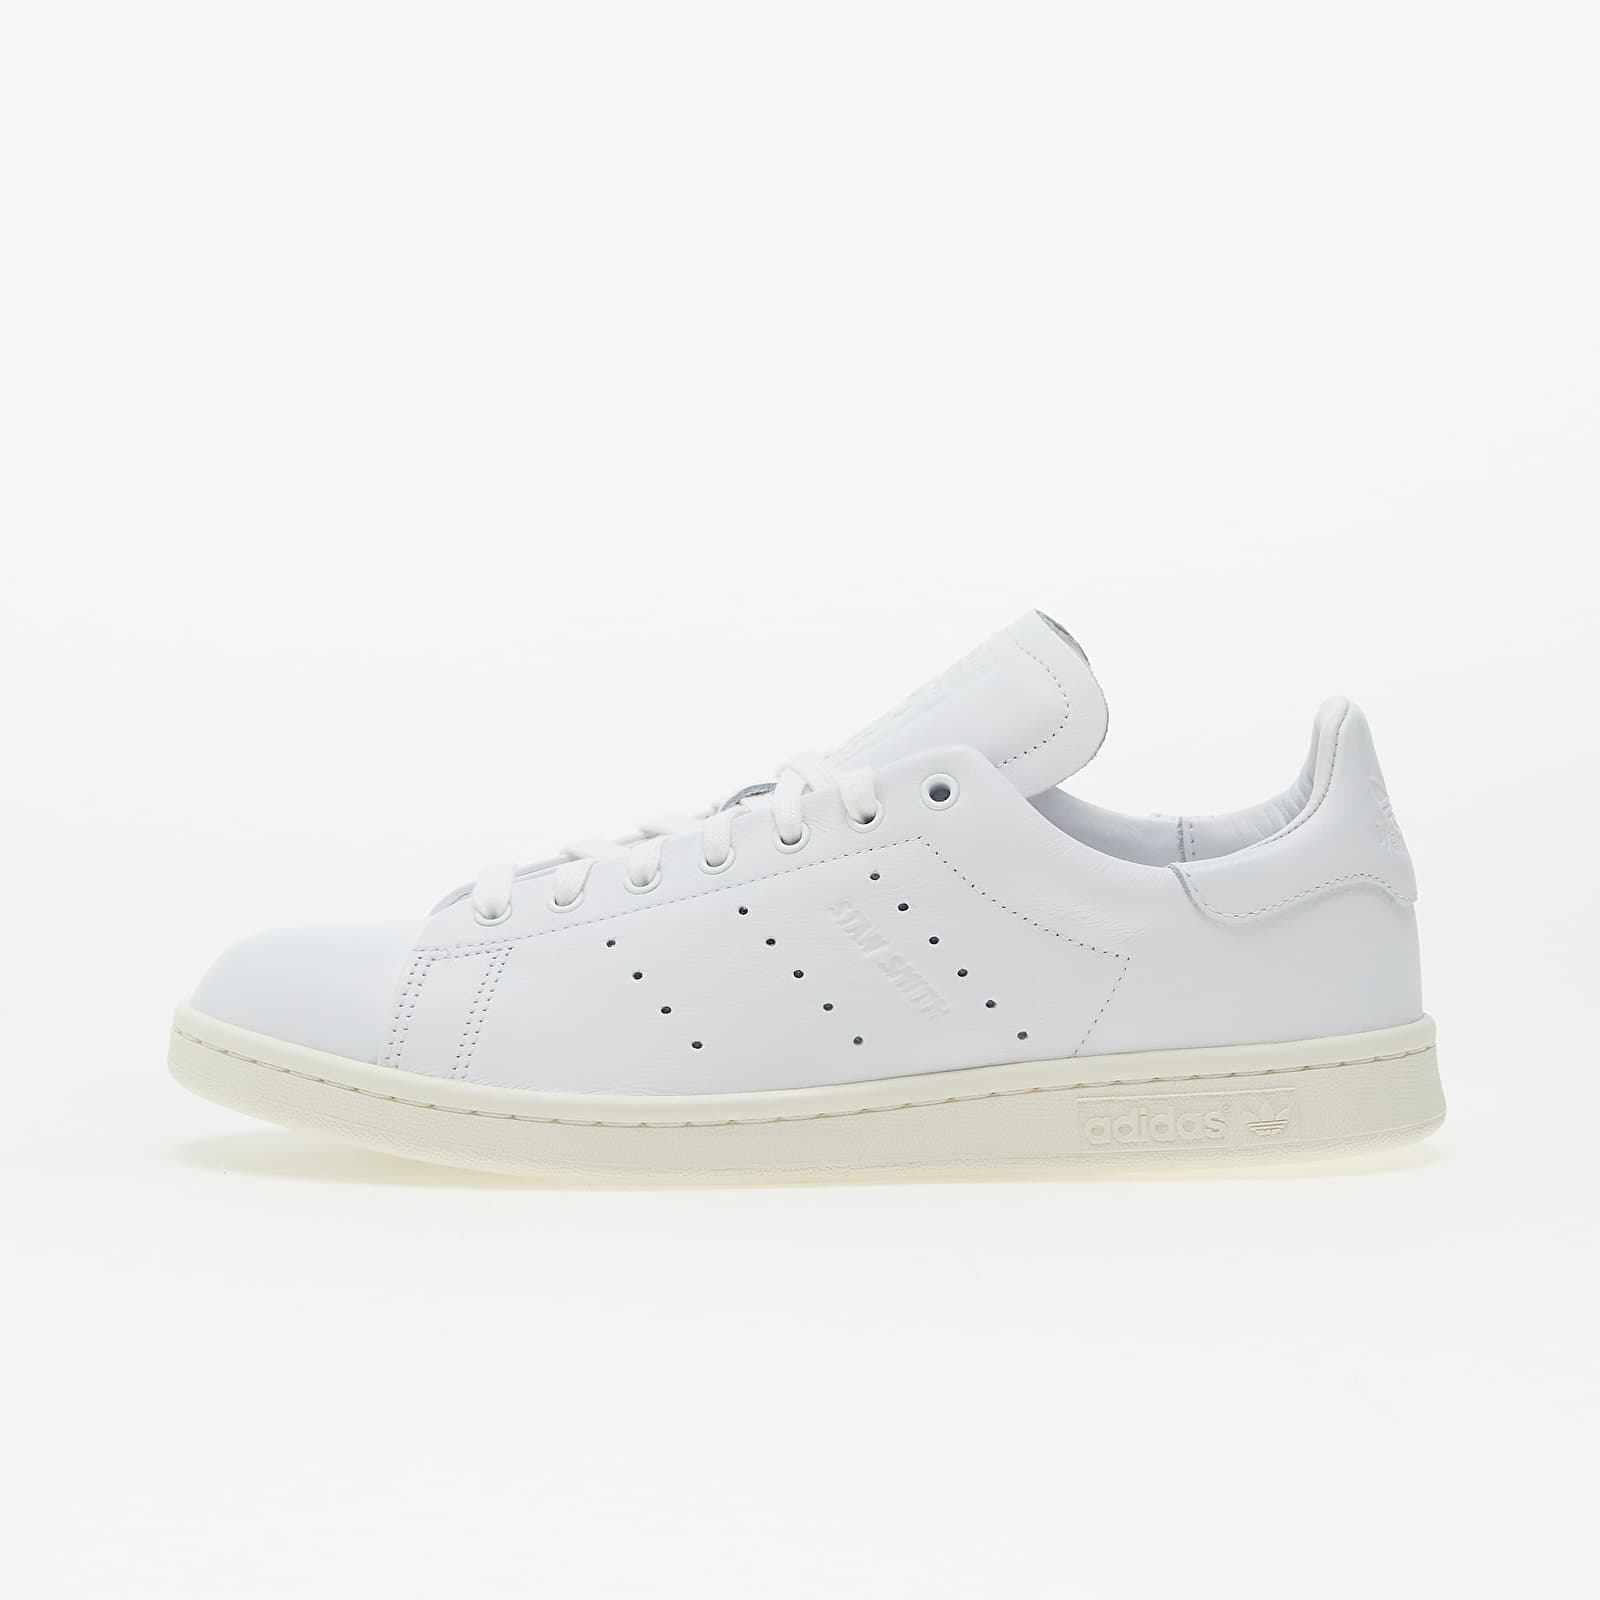 Baskets et chaussures pour hommes adidas Stan Smith Lux Ftw White/ Ftw White/ Off White